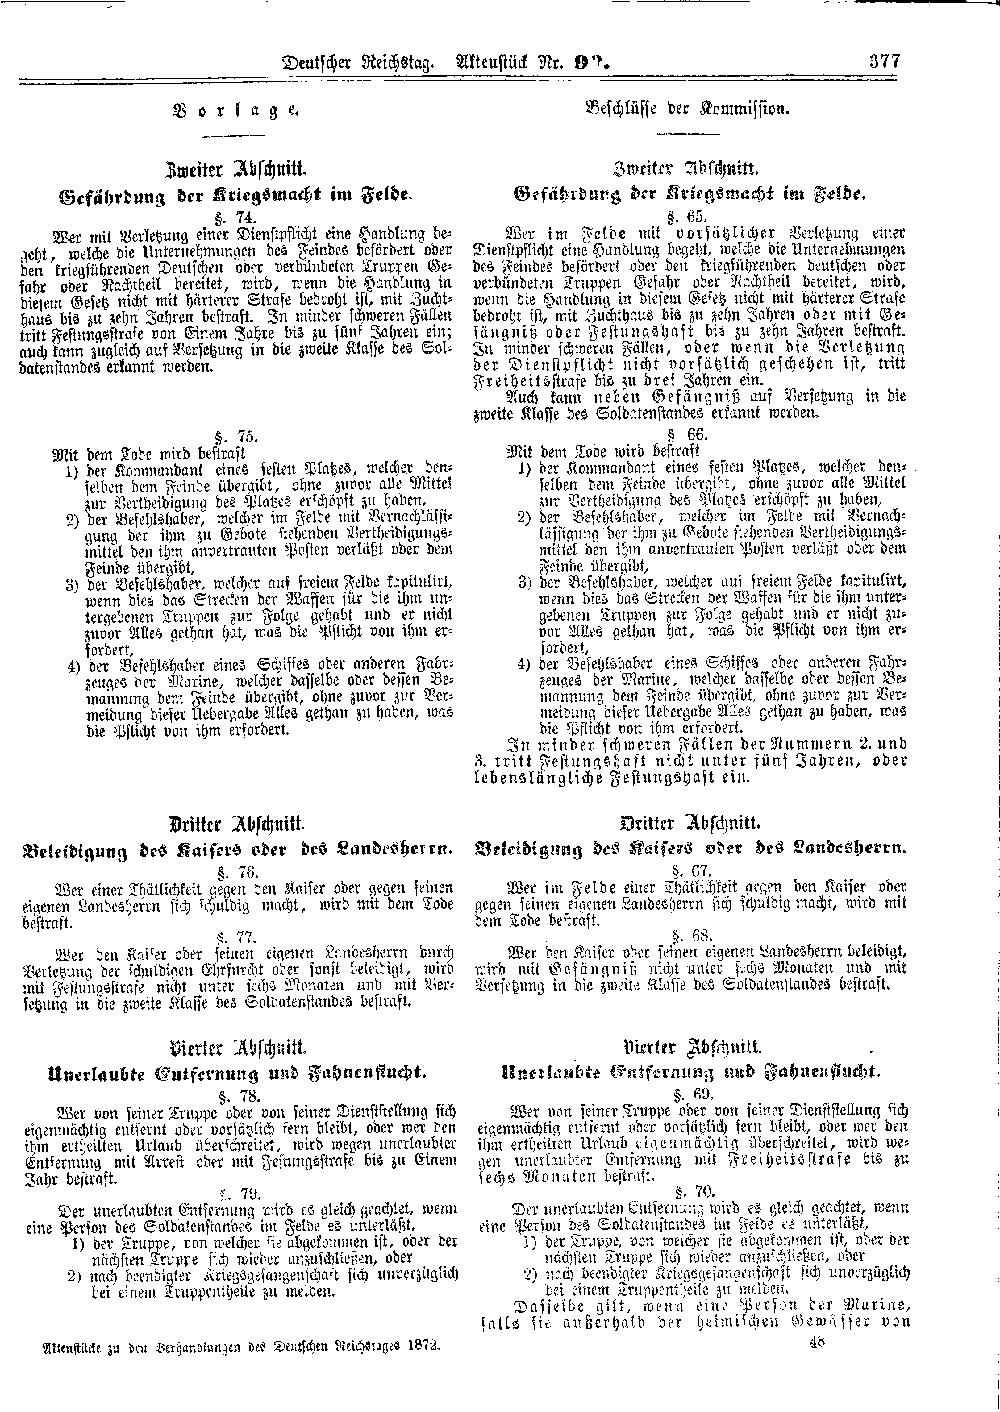 Scan of page 377